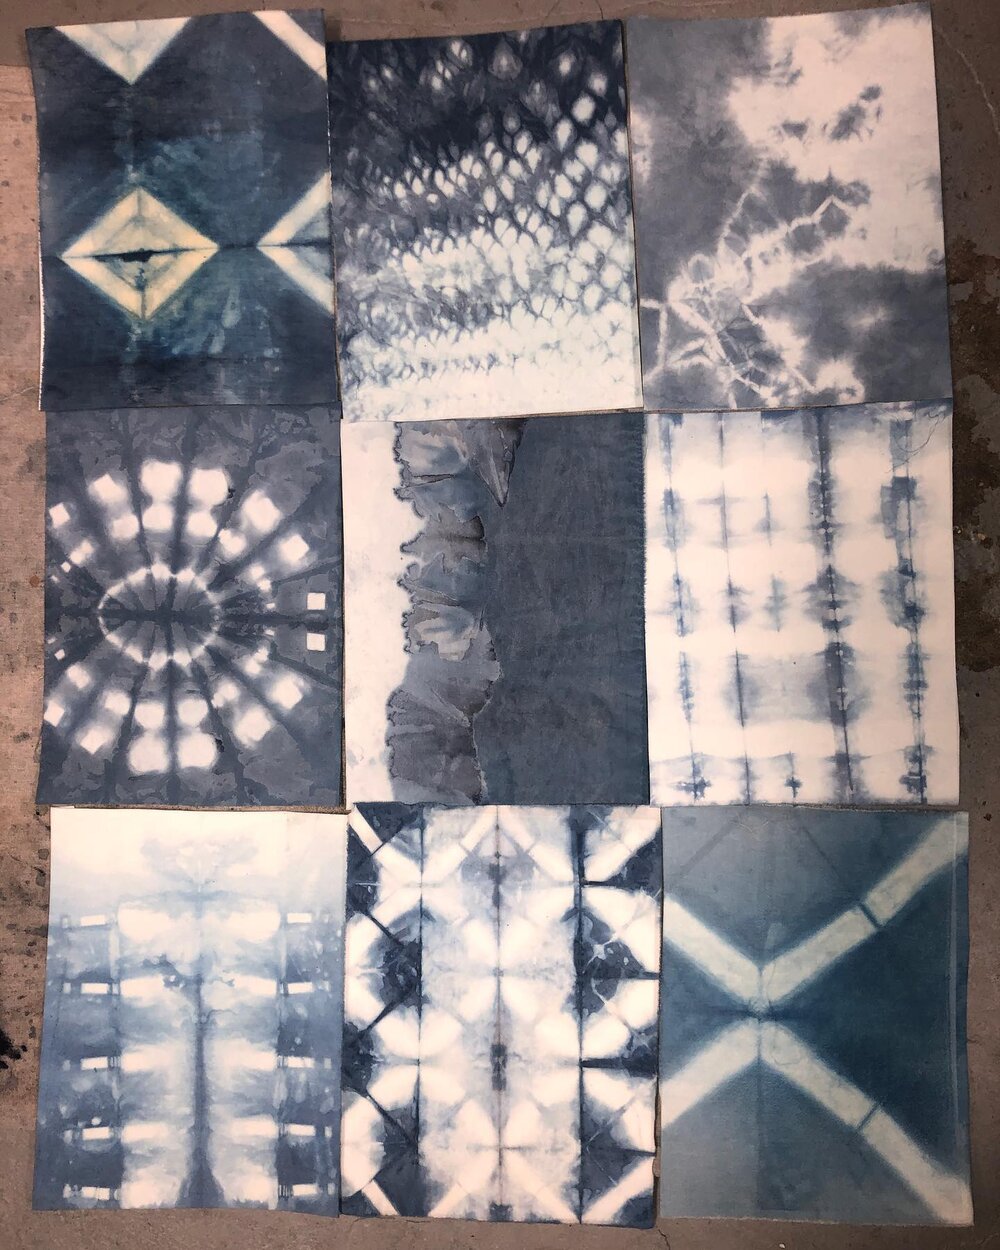 I&rsquo;ve been having fun experimenting with my various indigo vats and techniques to introduce pattern. One of my vats gives sort of a dull blue and another gives almost a turquoise (though that doesn&rsquo;t show very well in this picture). I have